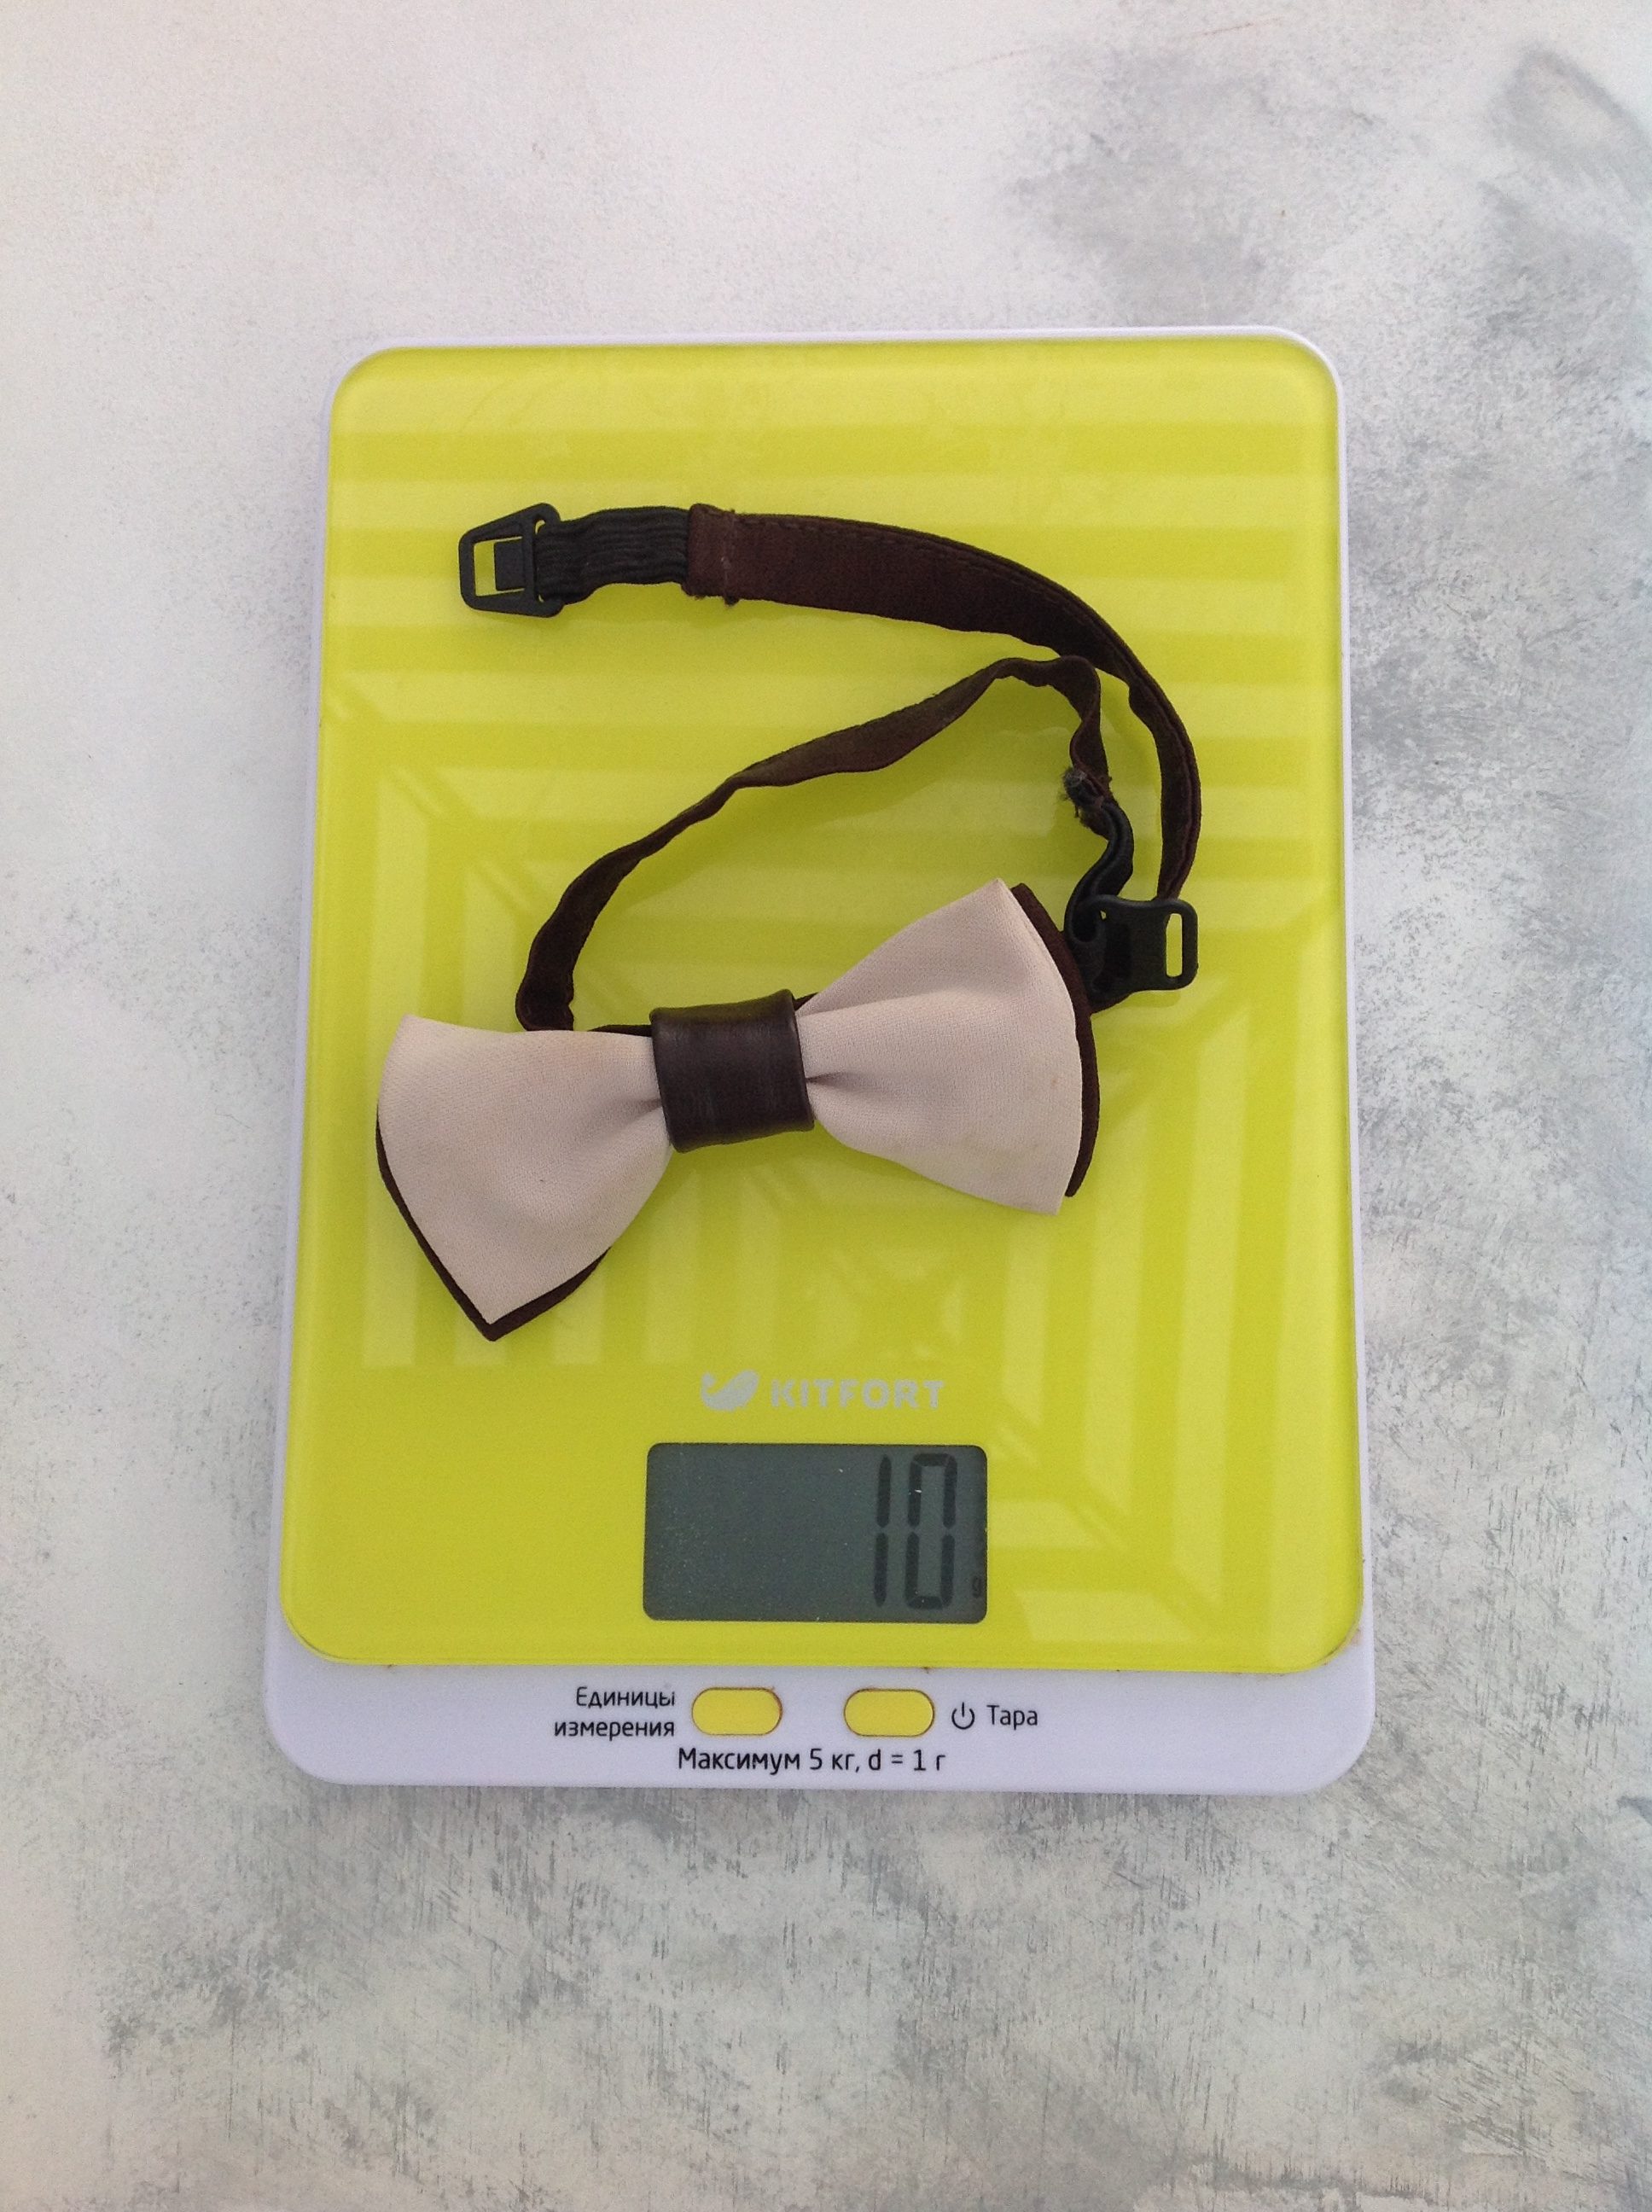 bow tie weight